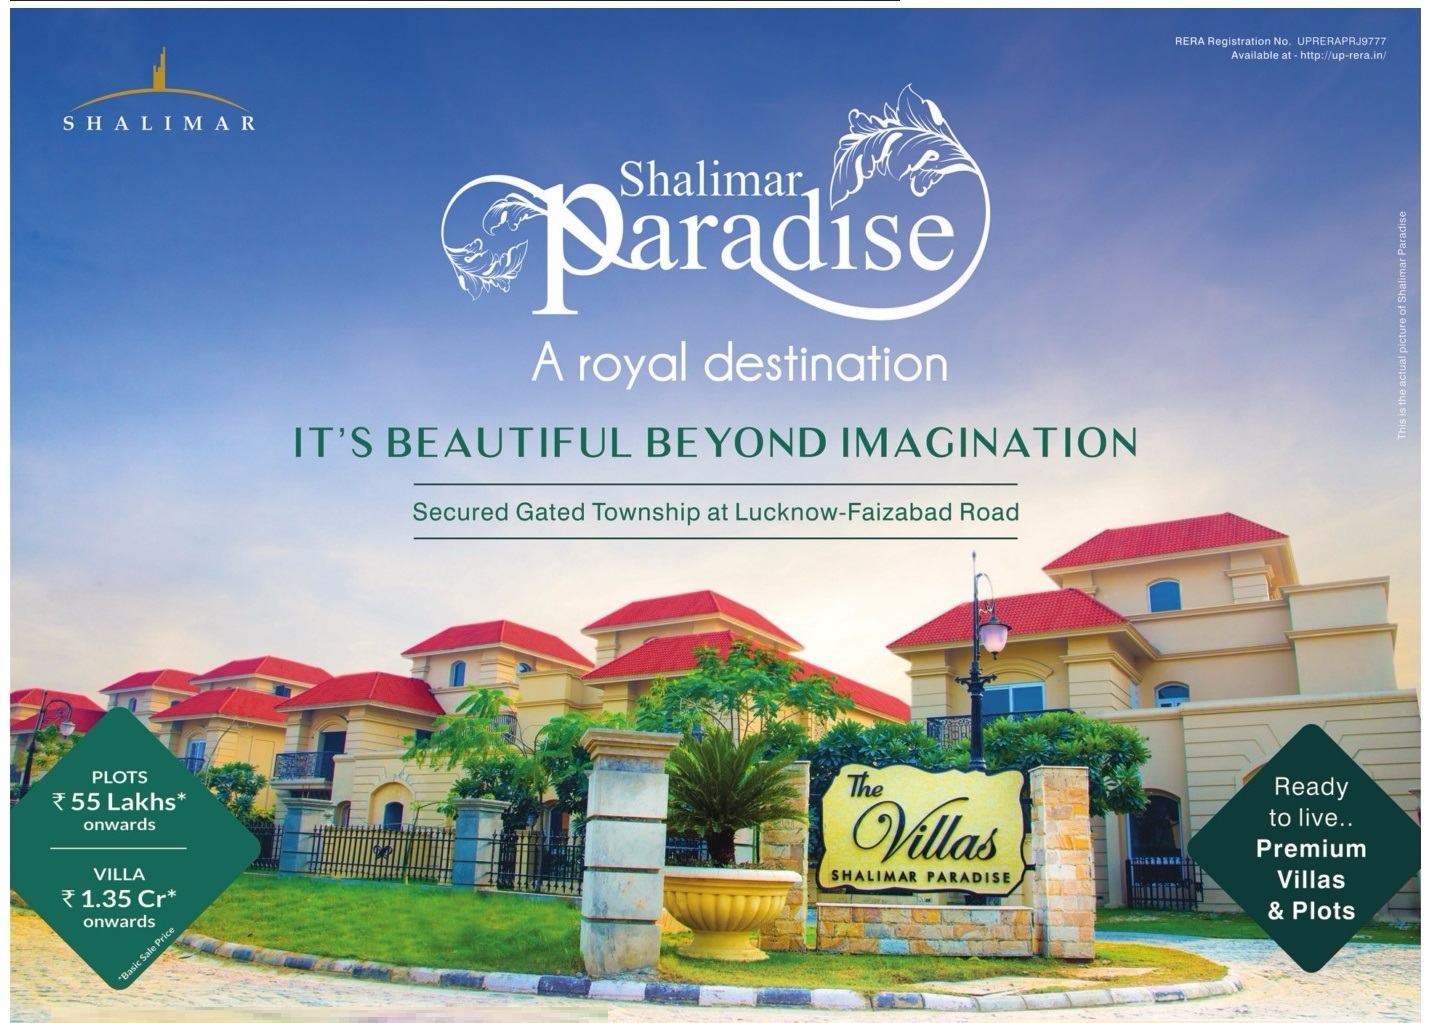 Shalimar Paradise - A secured gated township at Lucknow